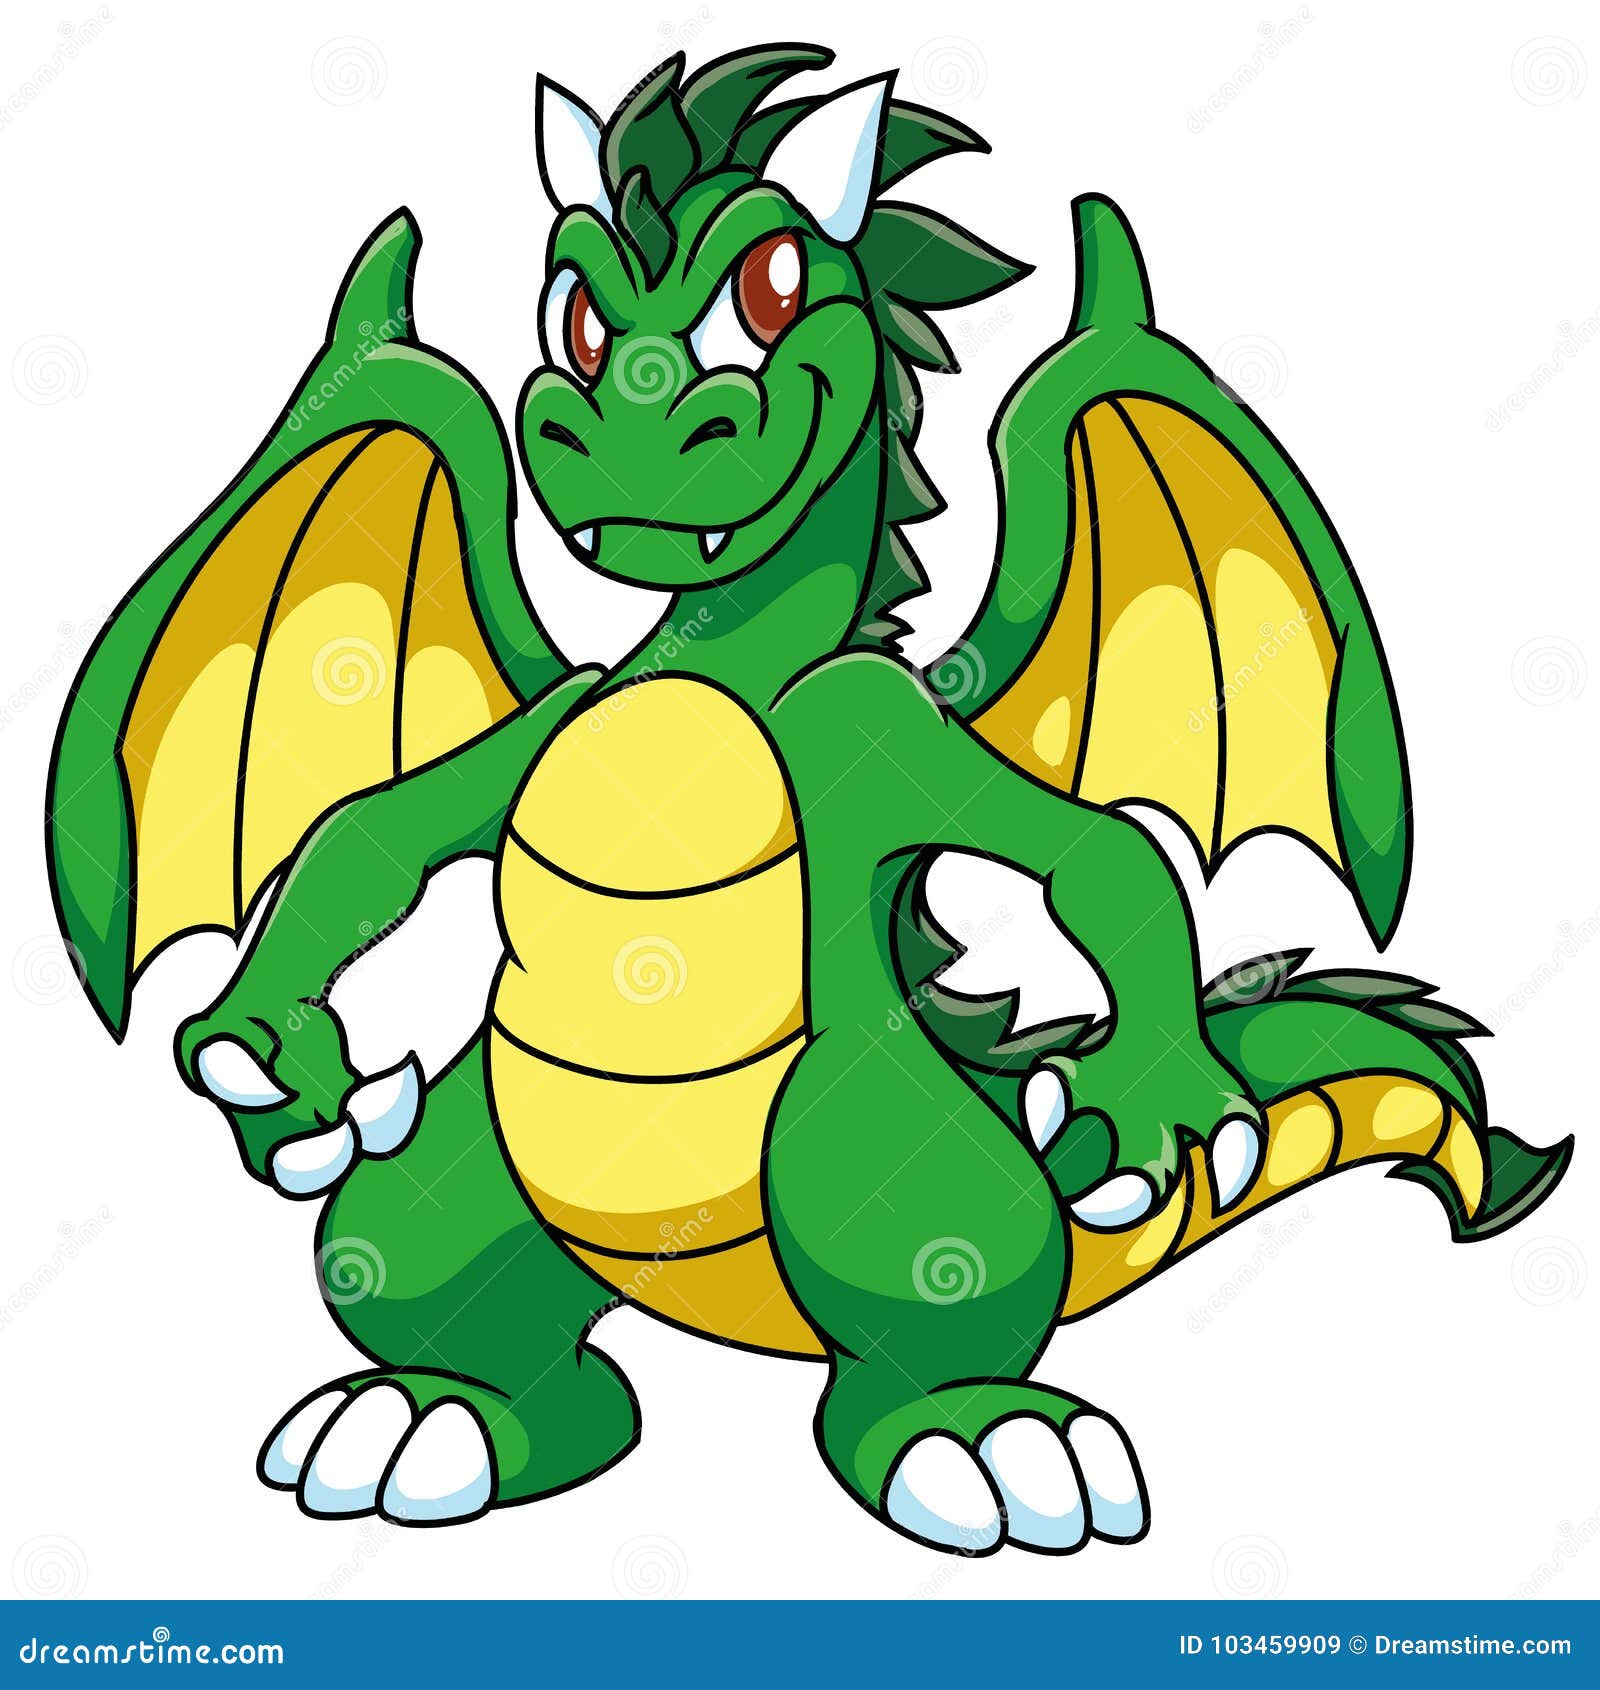 Green Winged Sly Dragon with Yellow Stomach and Wings, with Darken Horns,  Cartoon, Fantasy. Stock Vector - Illustration of strong, winged: 103459909